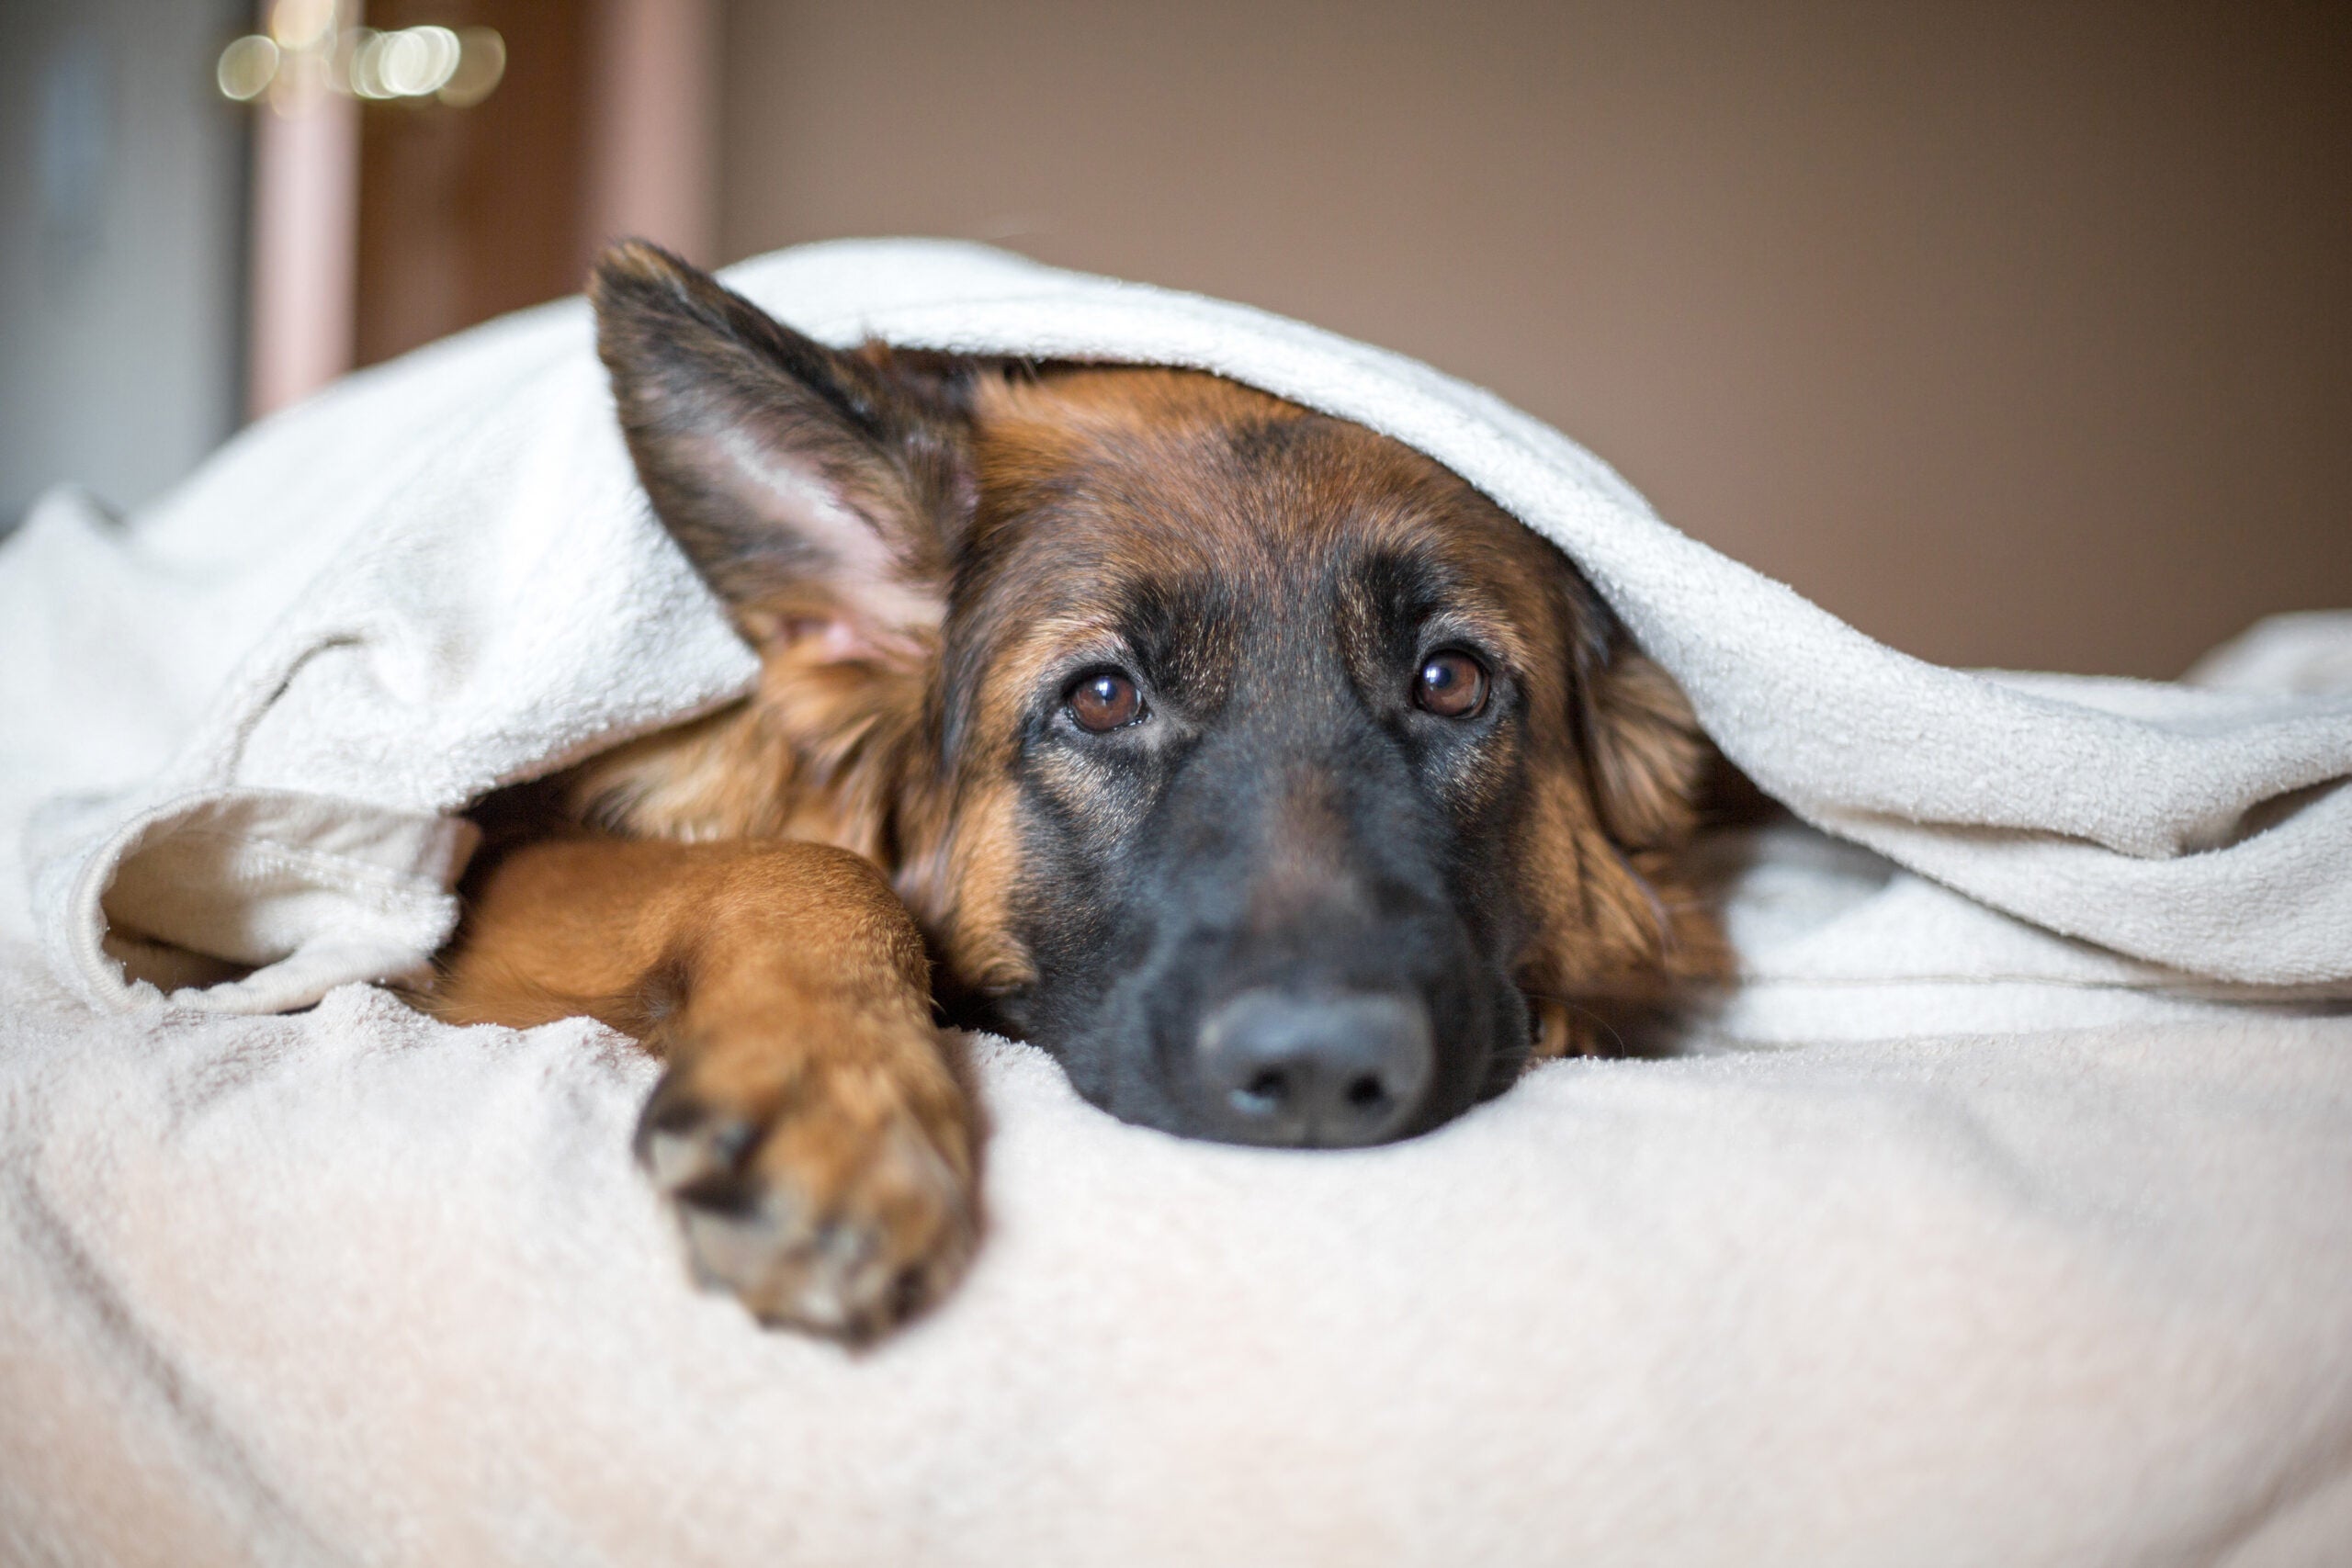 A German shepherd dog lying on a bed, under a white blanket